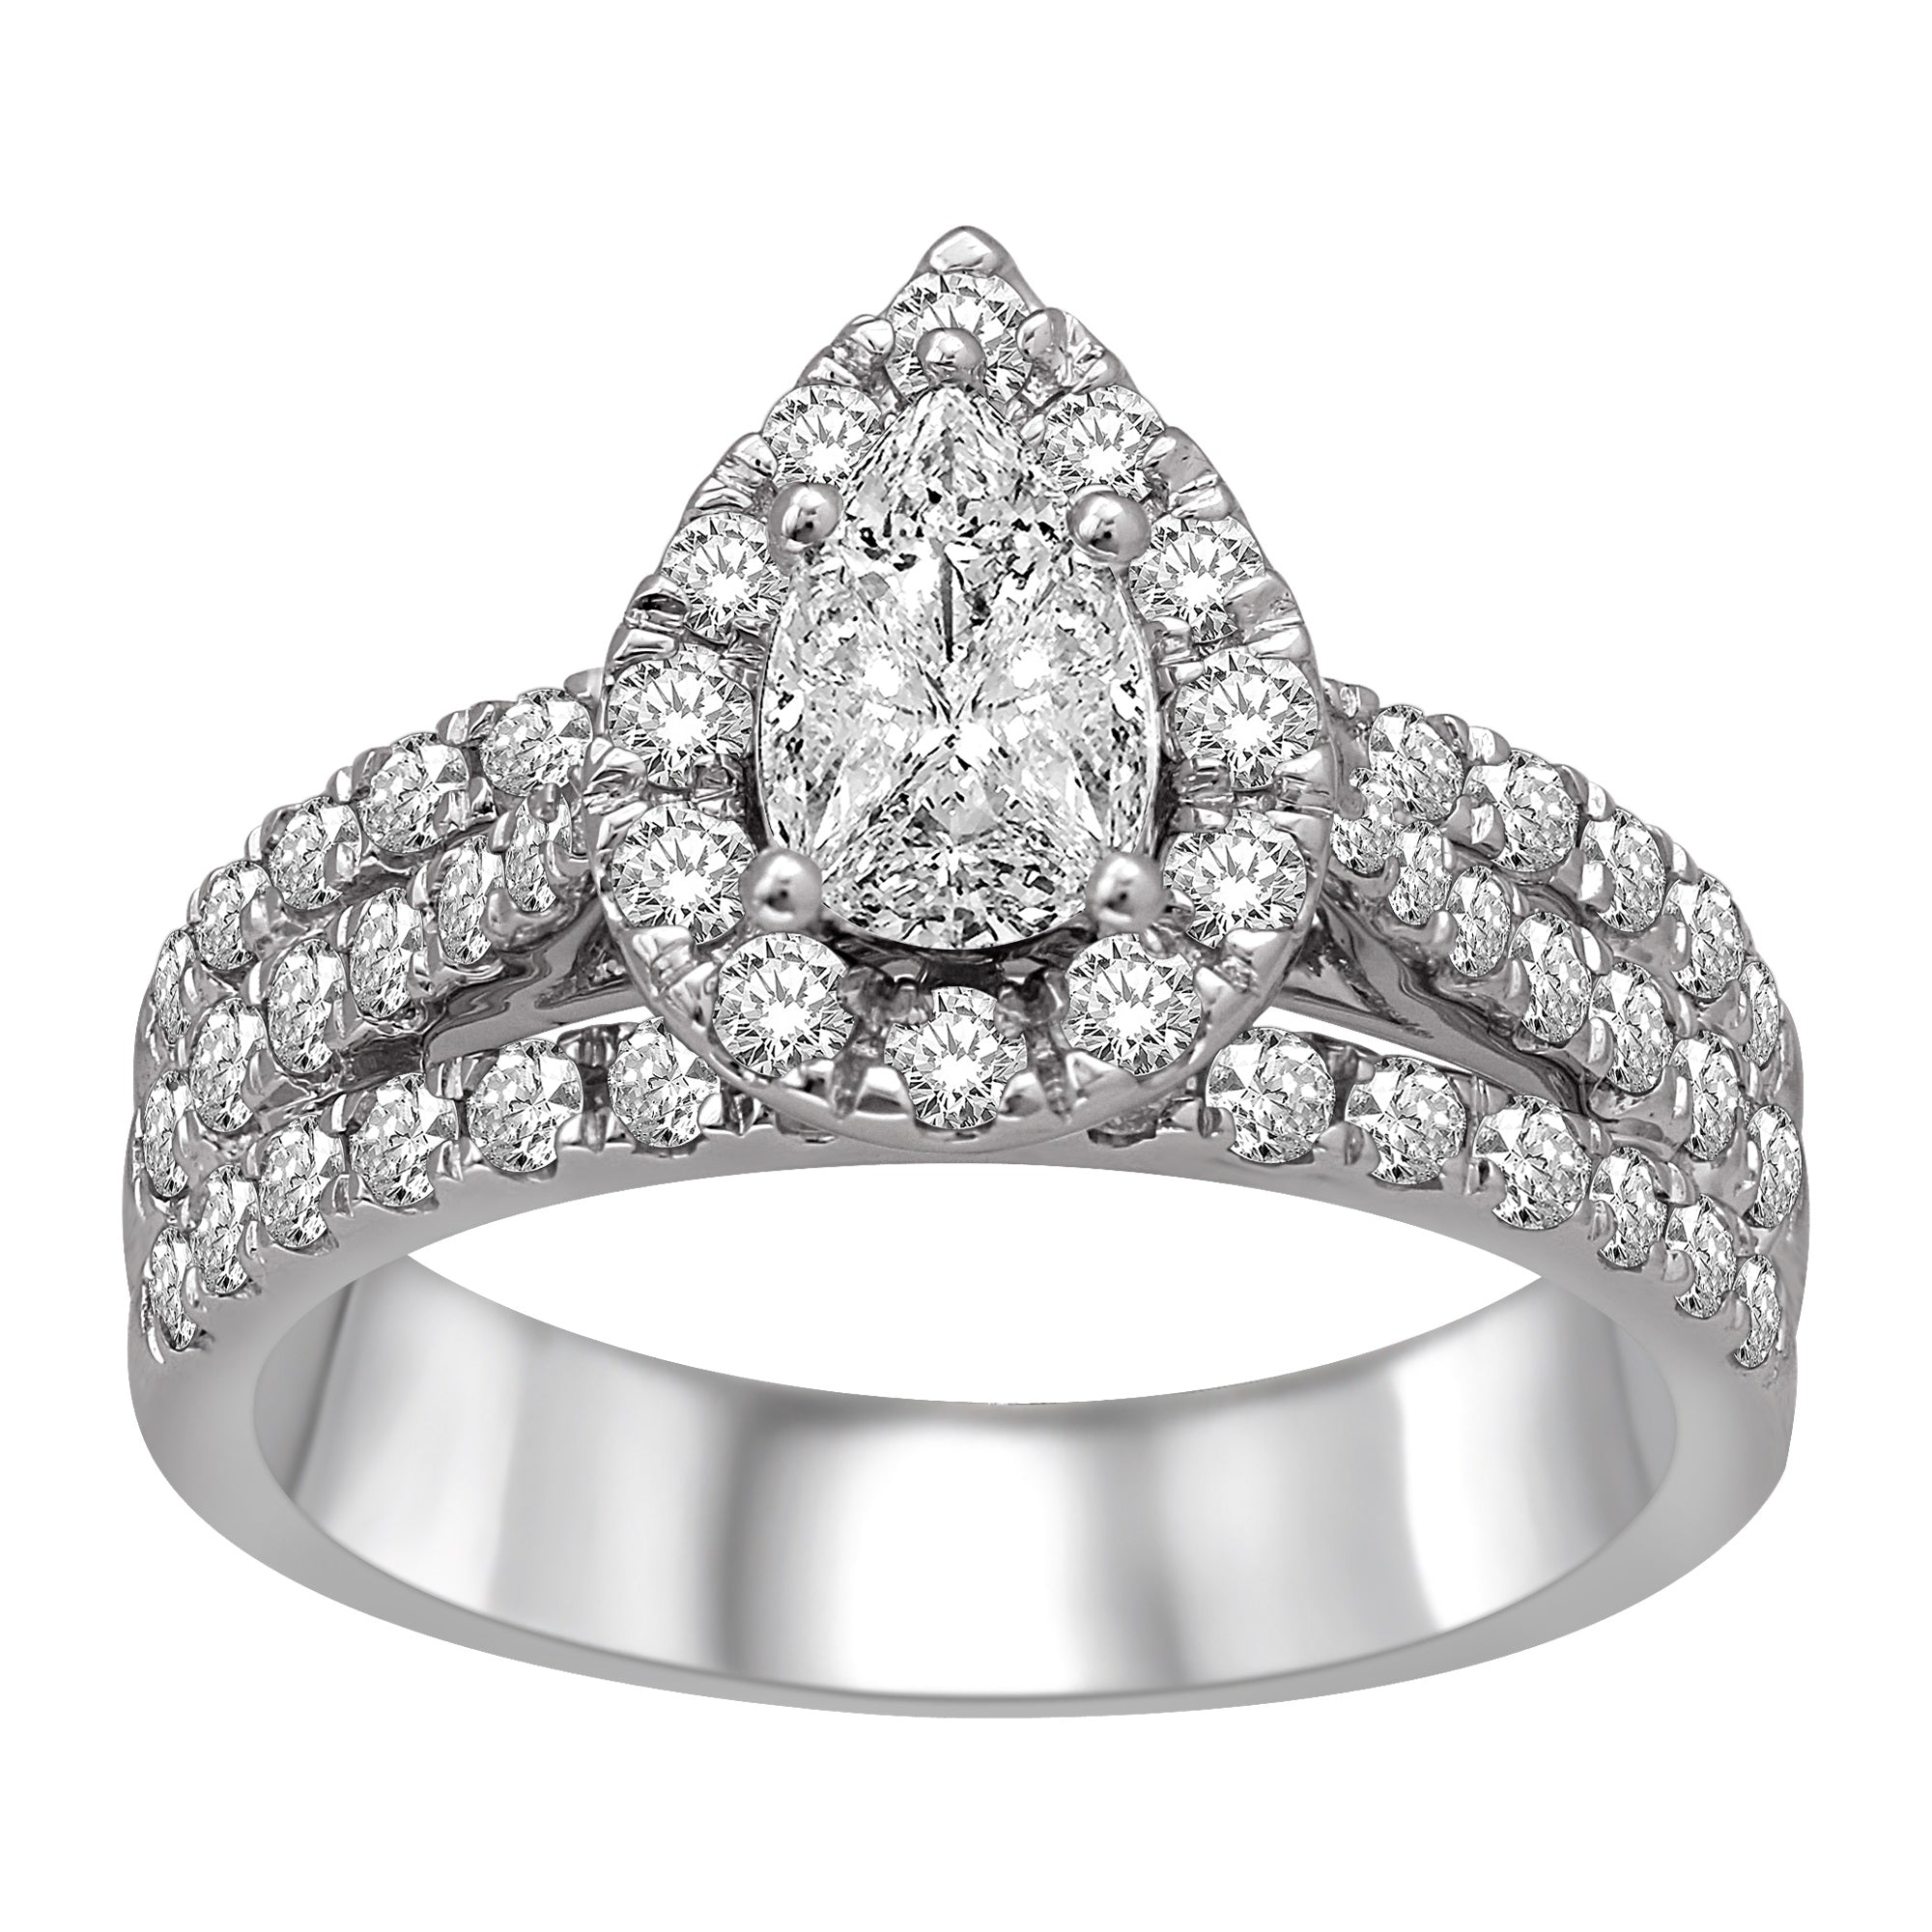 Lovecuts 14K White Gold 1 1/2 Ct.Tw.Diamond Engagement Ring